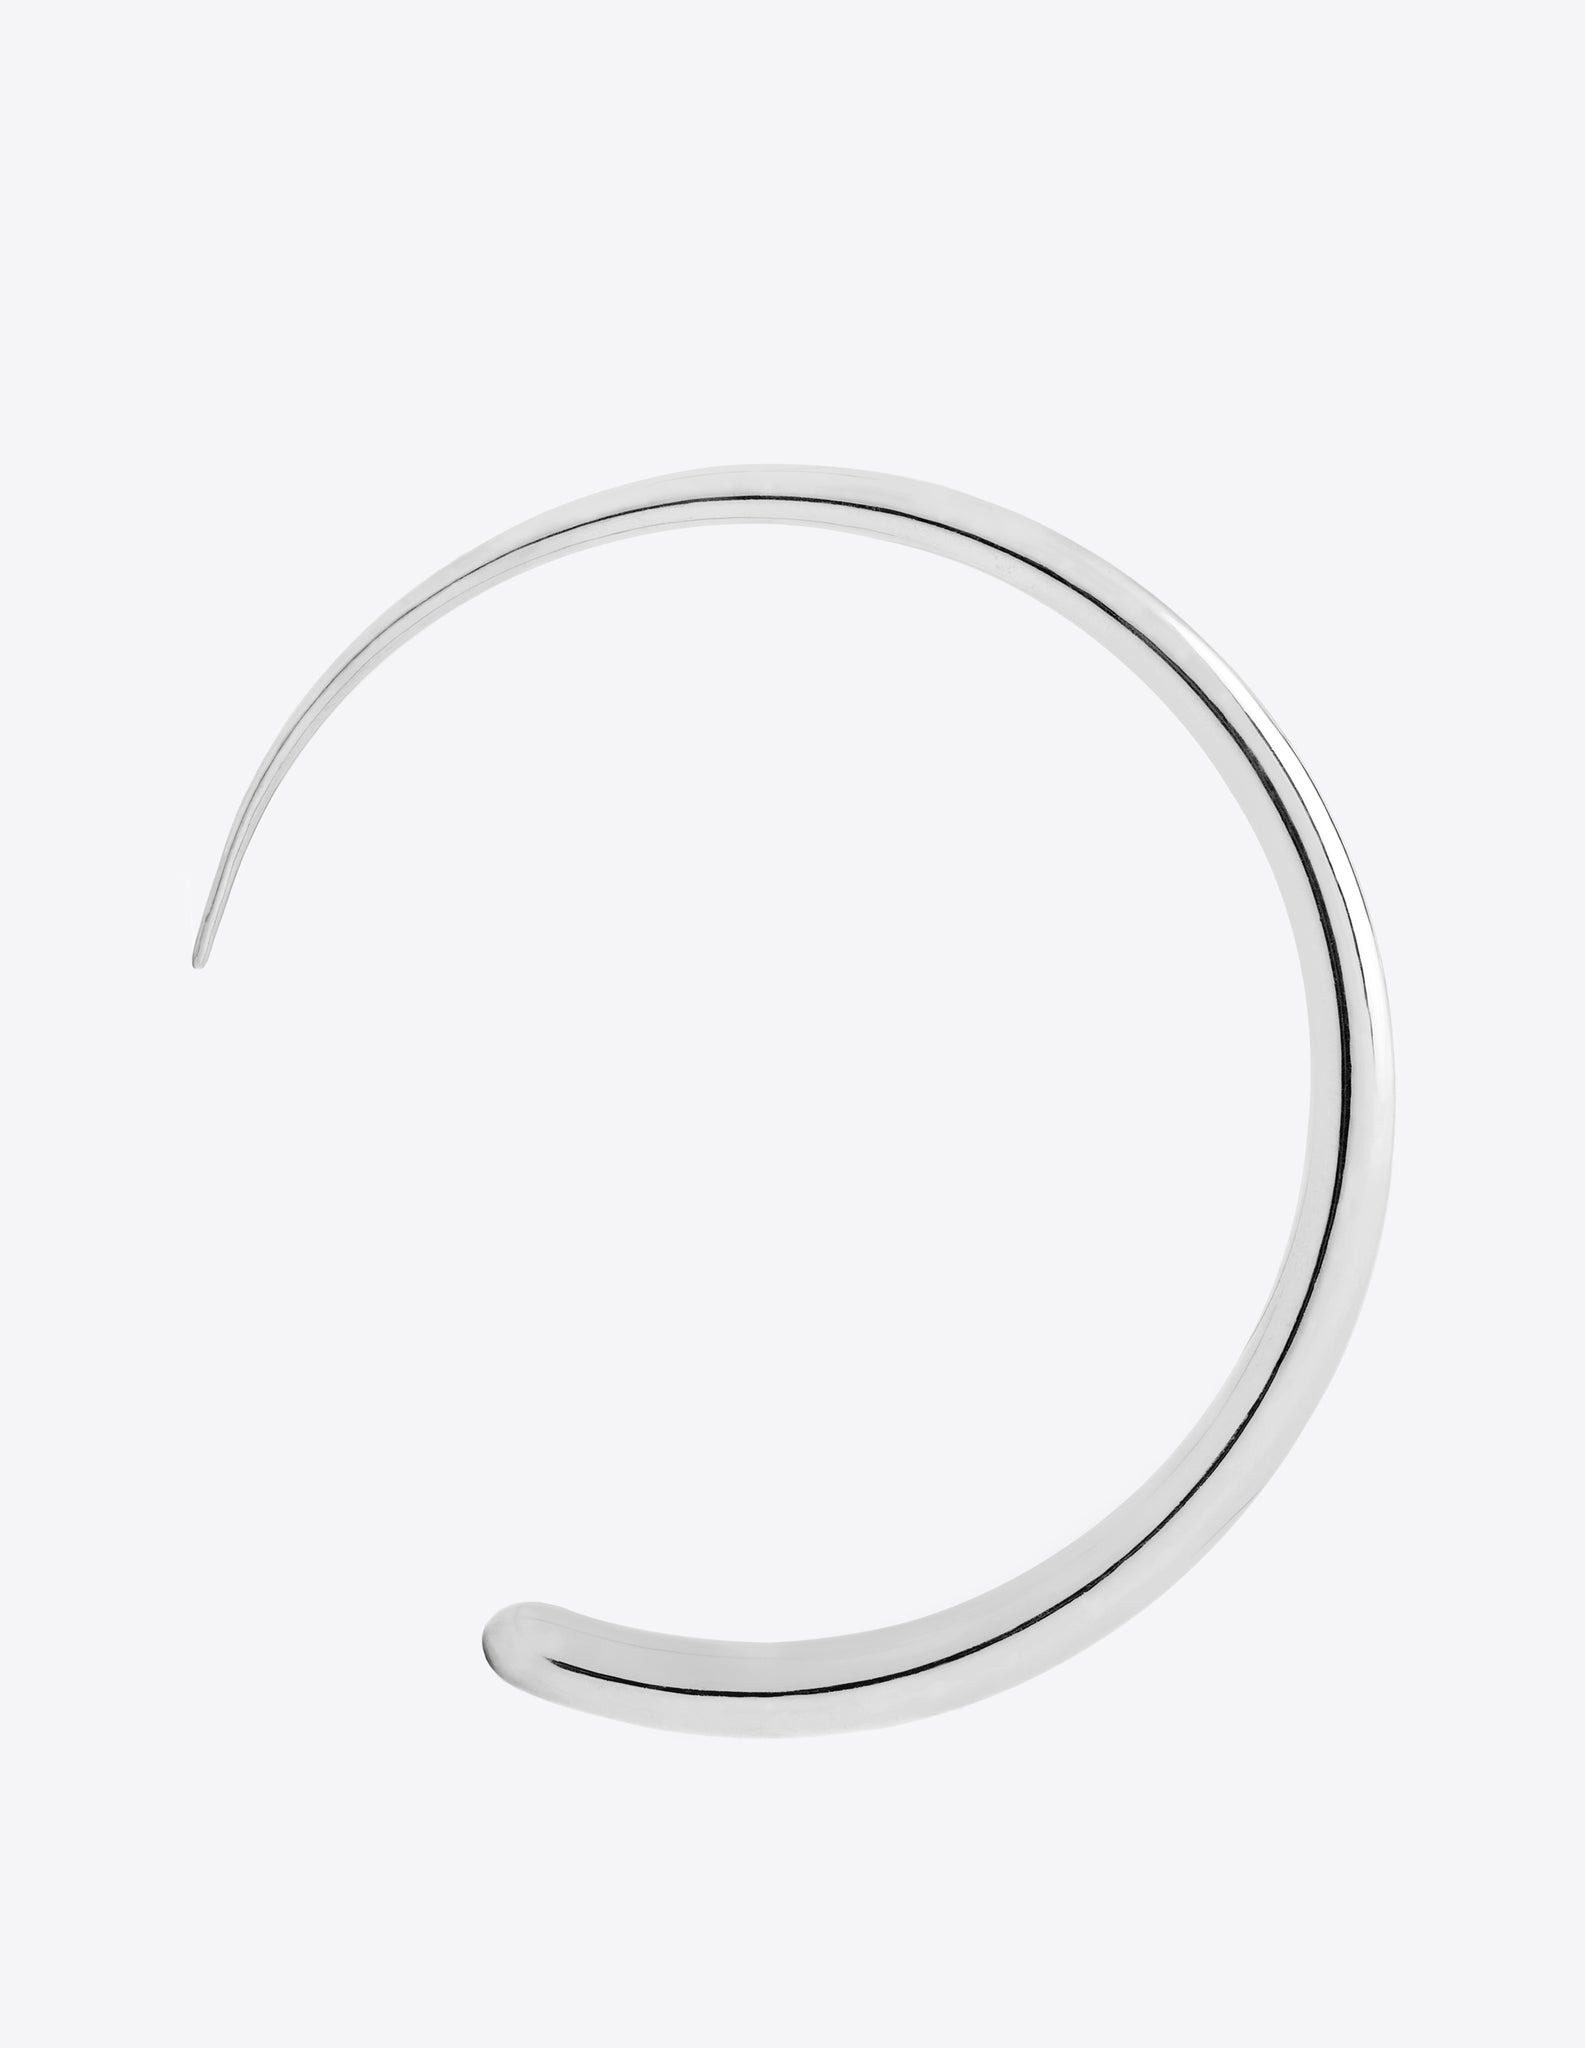 Khartoum Torc Nude in Sterling Silver